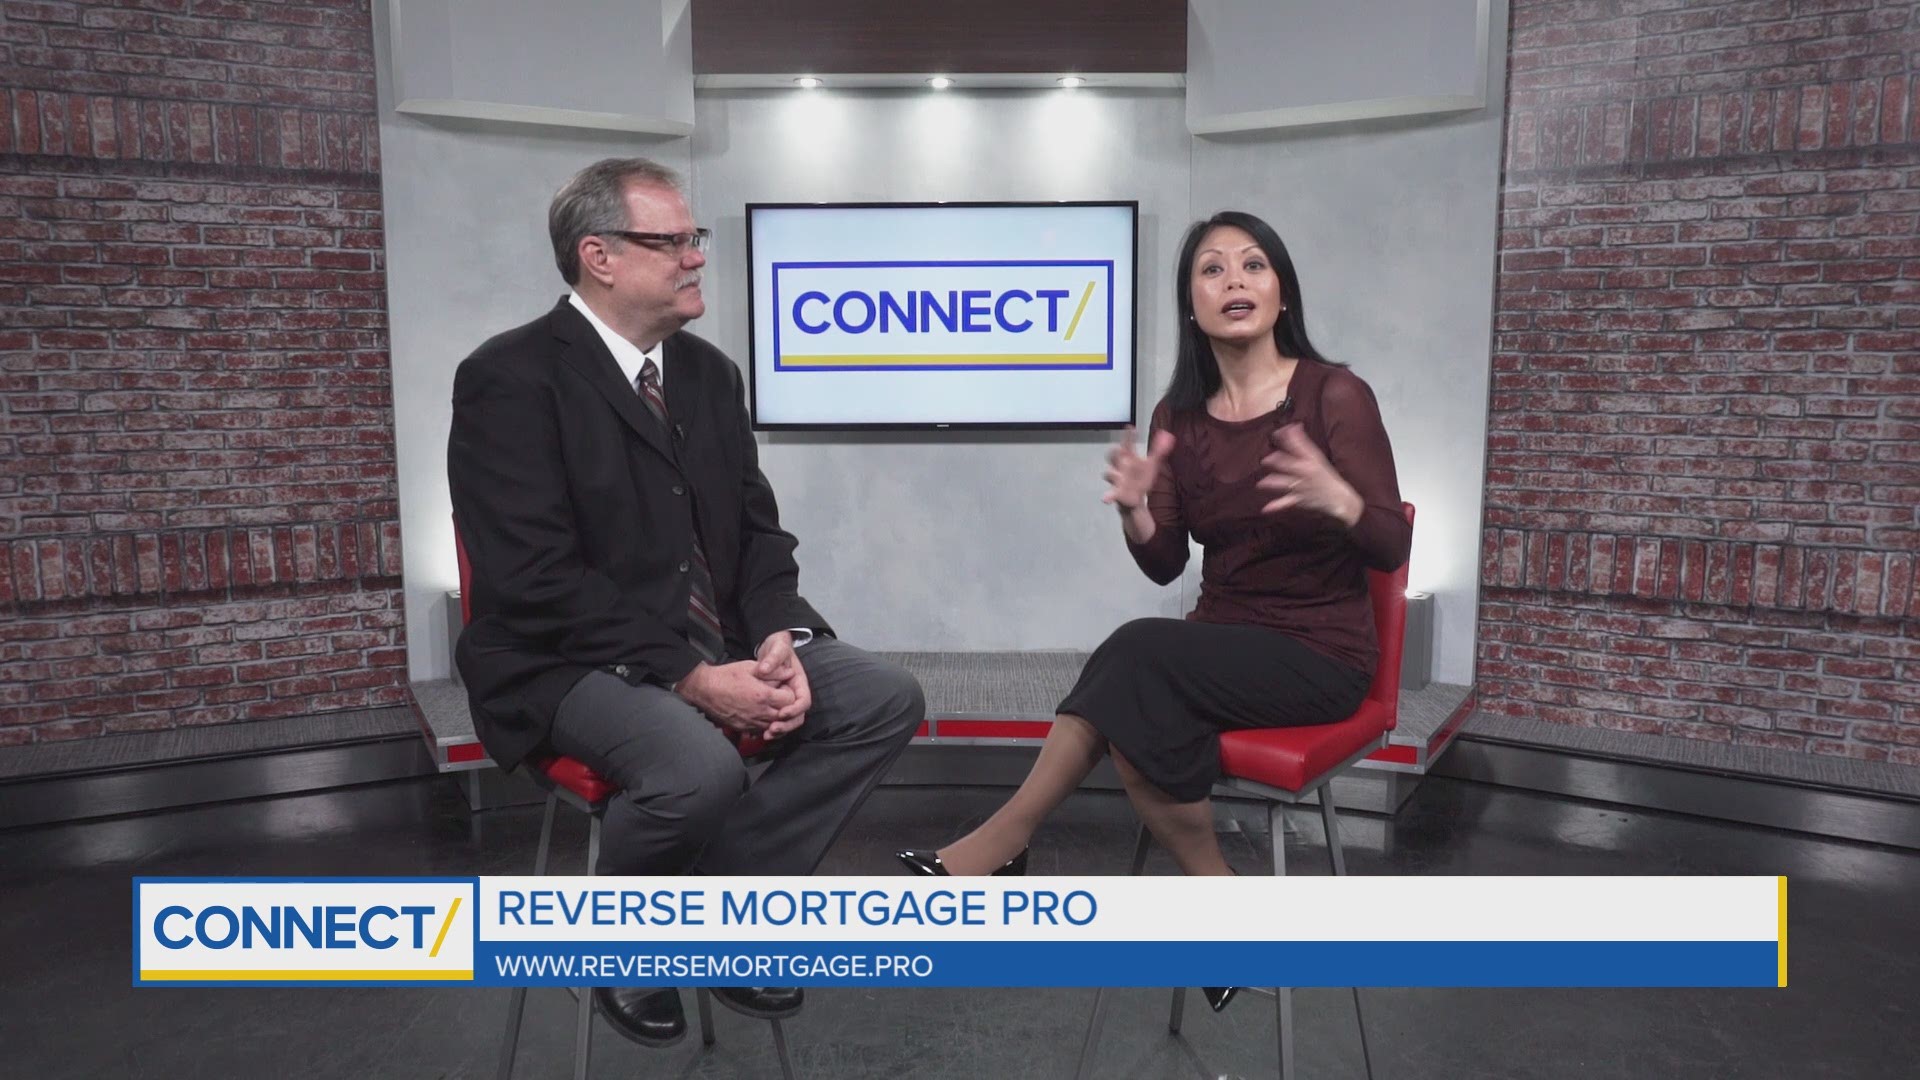 Discussing finances with family isn't always easy. Reverse Mortgage Pro will sit with you and your loved ones to help explain and sort things out.